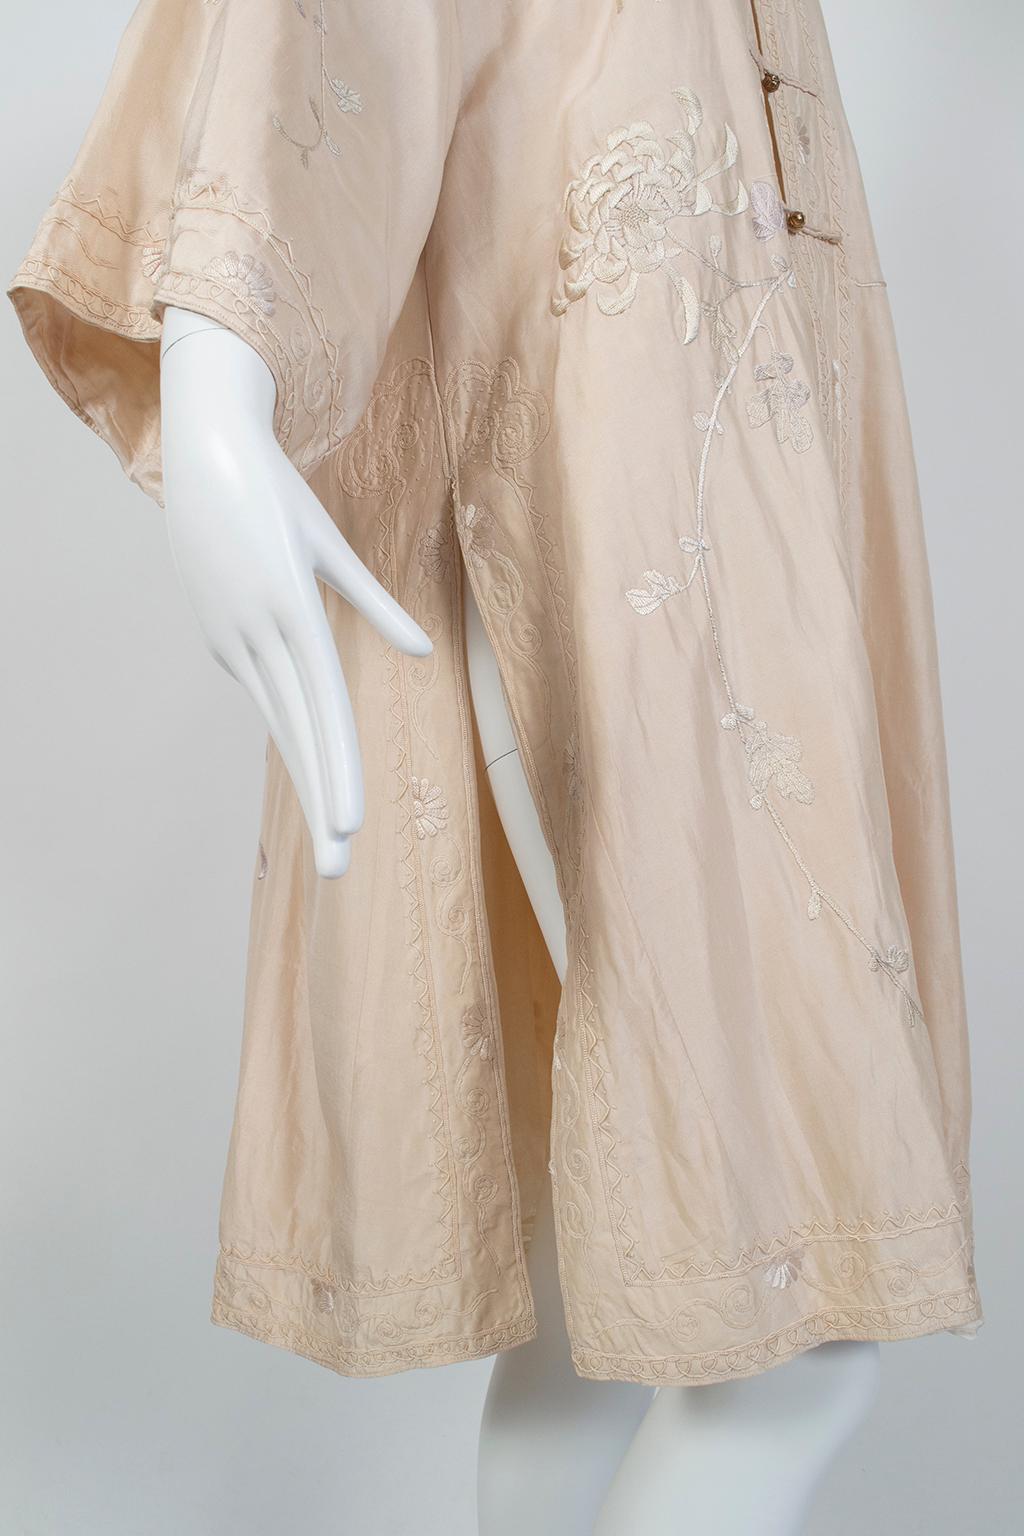 Blush Edwardian *Larger Size* Padded Canton Silk Embroidered Robe - O/S, 1900s For Sale 3